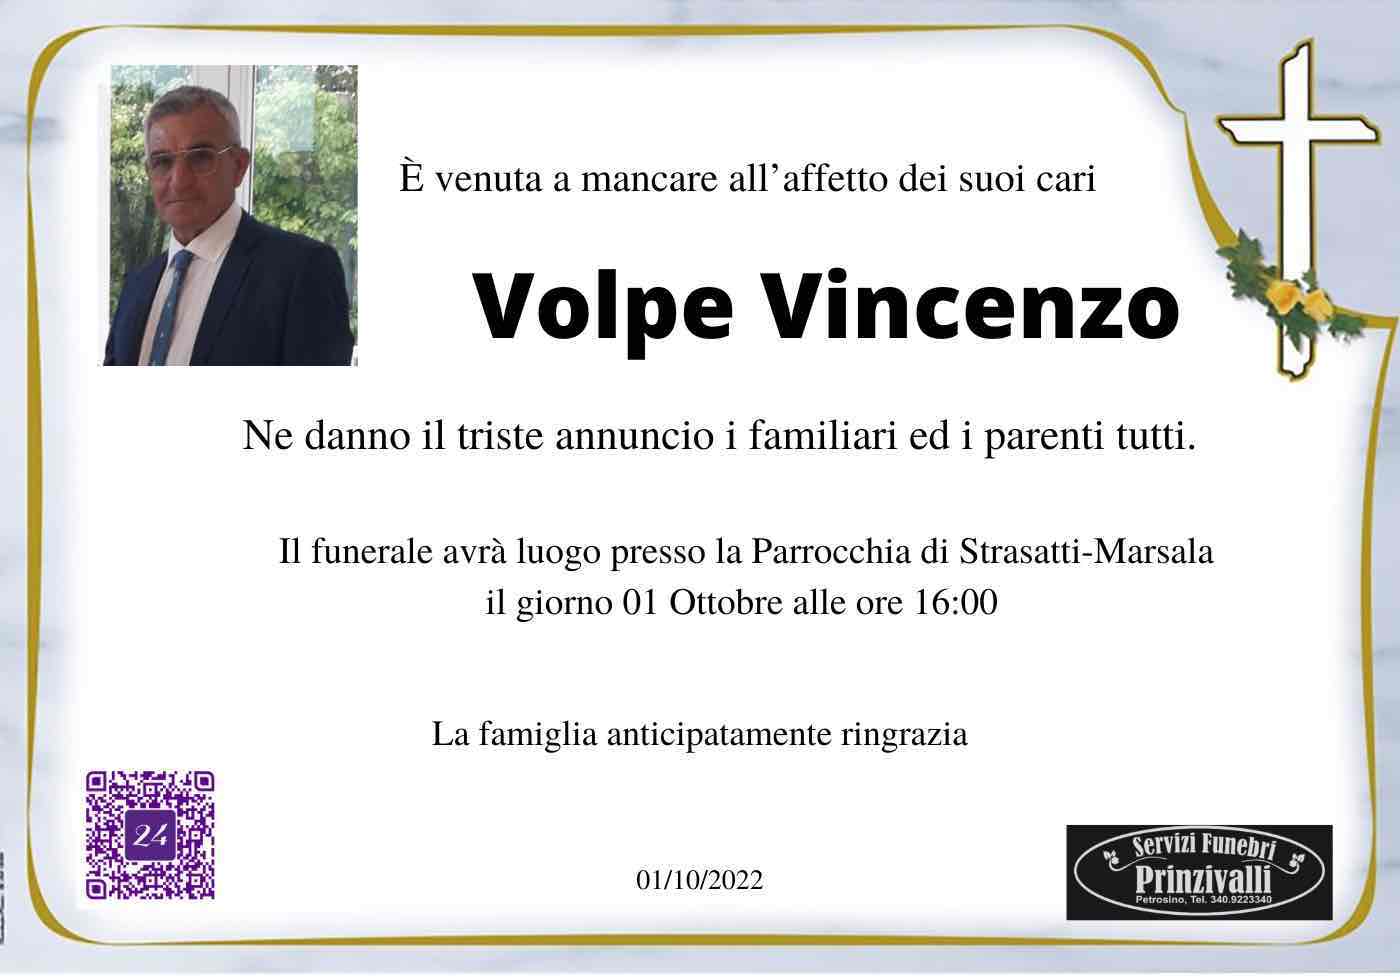 Vincenzo Volpe